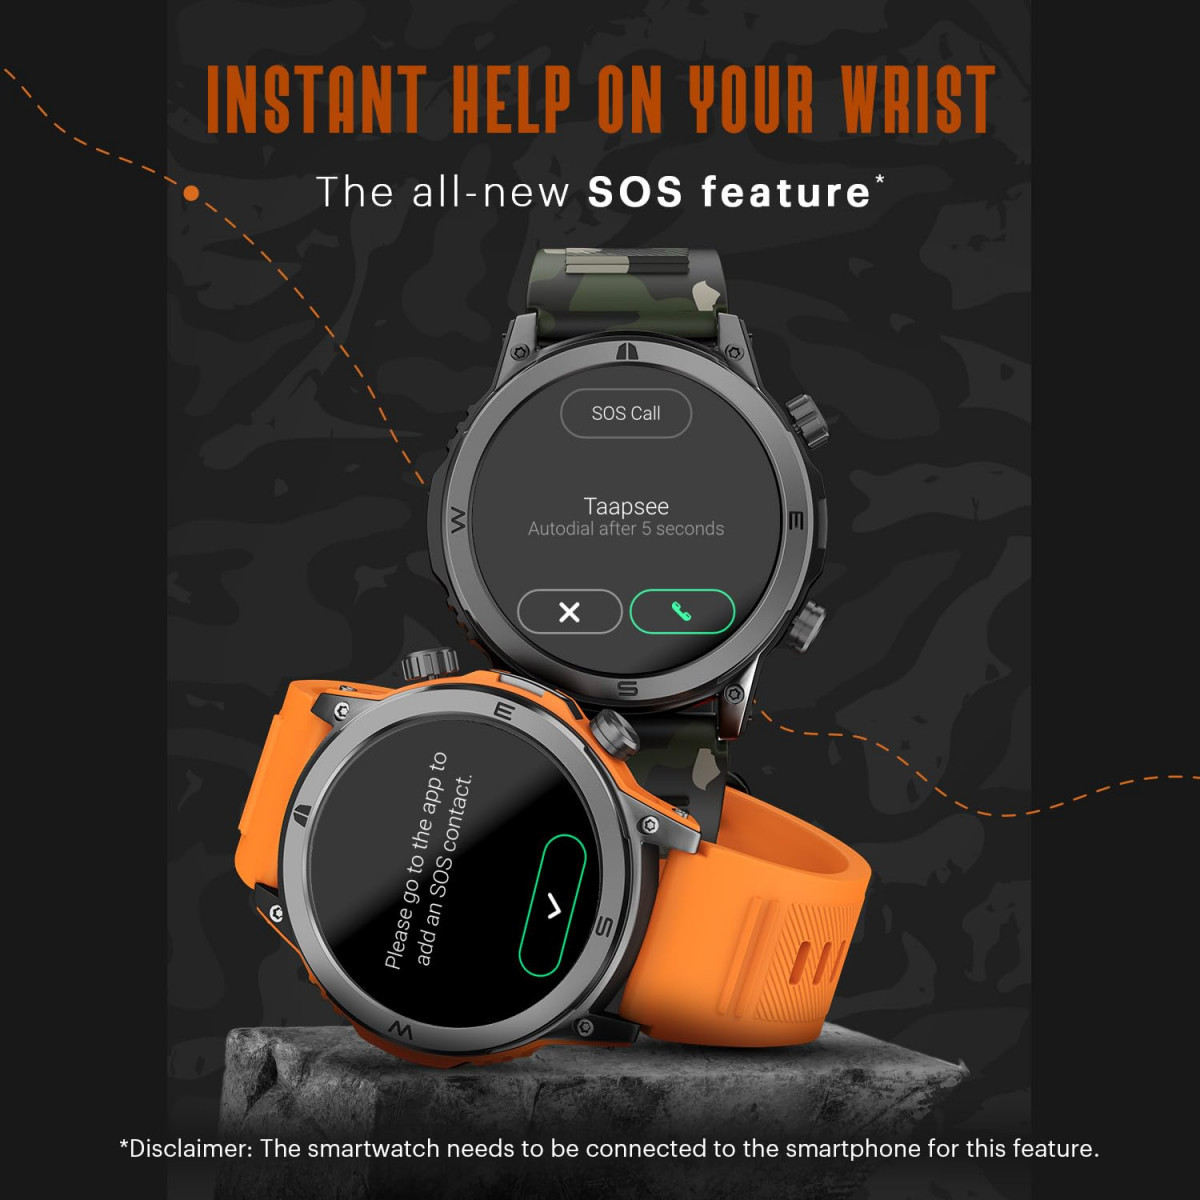 Noise Newly Launched Endeavour Rugged Design 146 AMOLED Display Smart Watch BT Calling SoS Feature Rapid Health  100 Sports Modes- Teal Blue